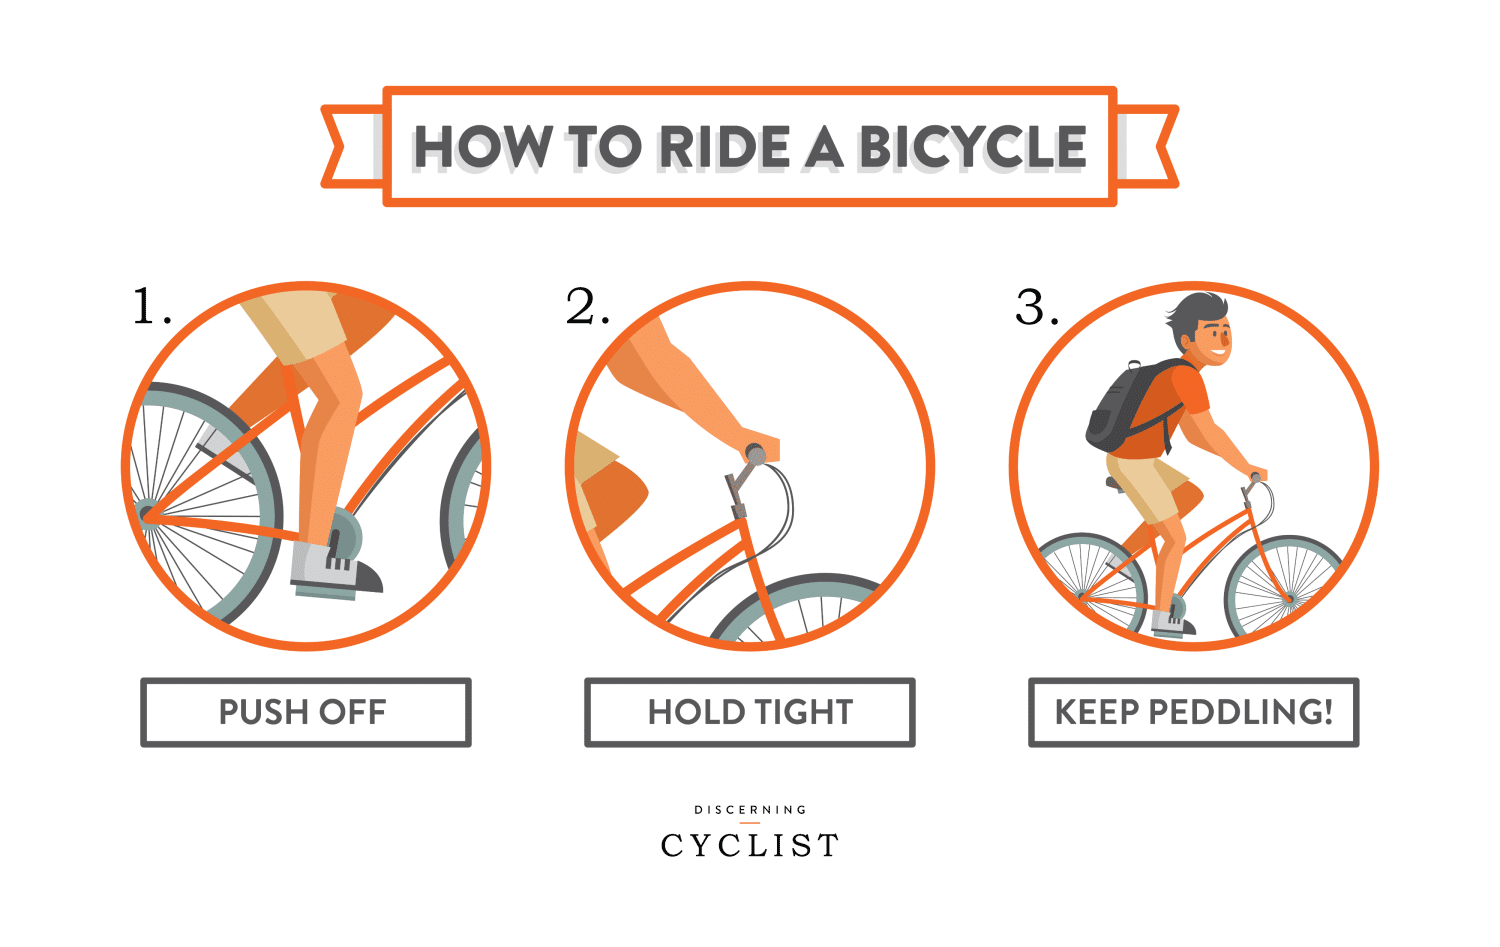 How to Ride a Bike. To Ride перевод. Push Bicycle. Ride a Bike перевод на русский.